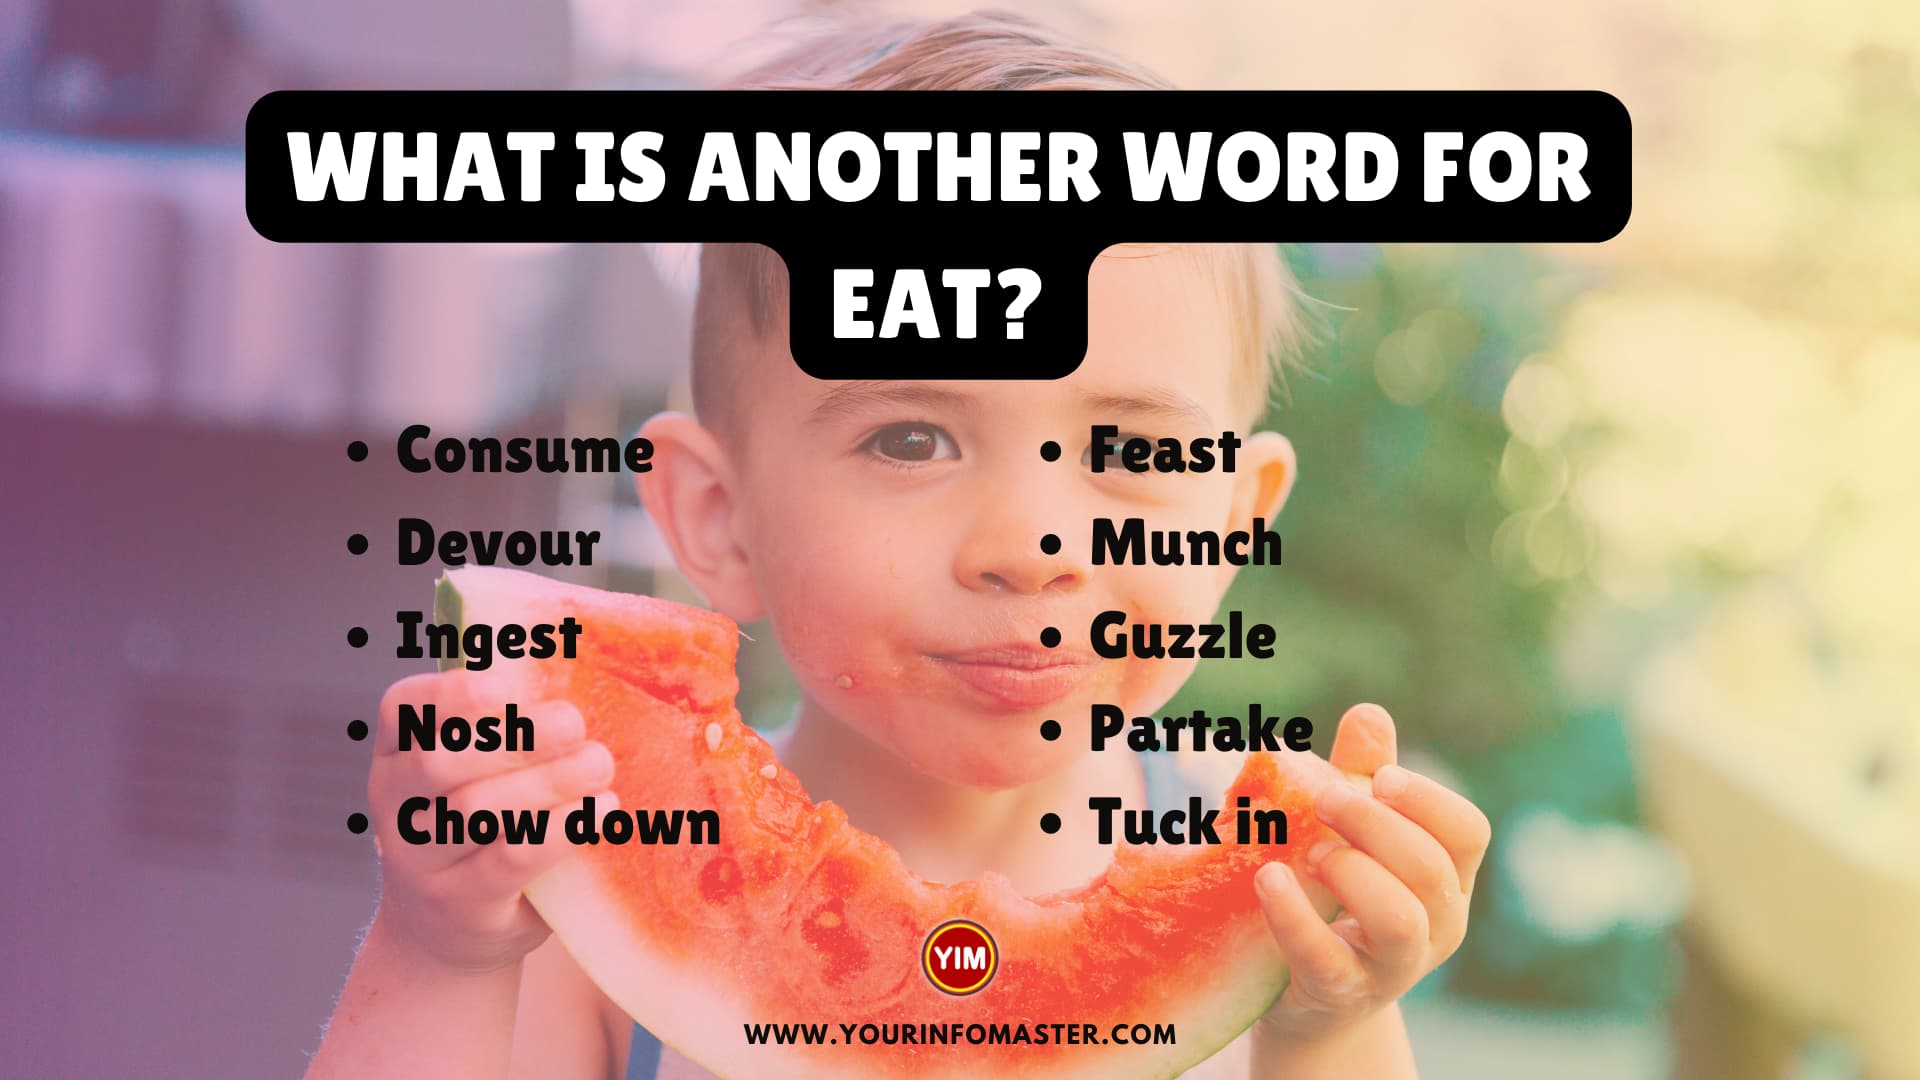 What is another word for Eat